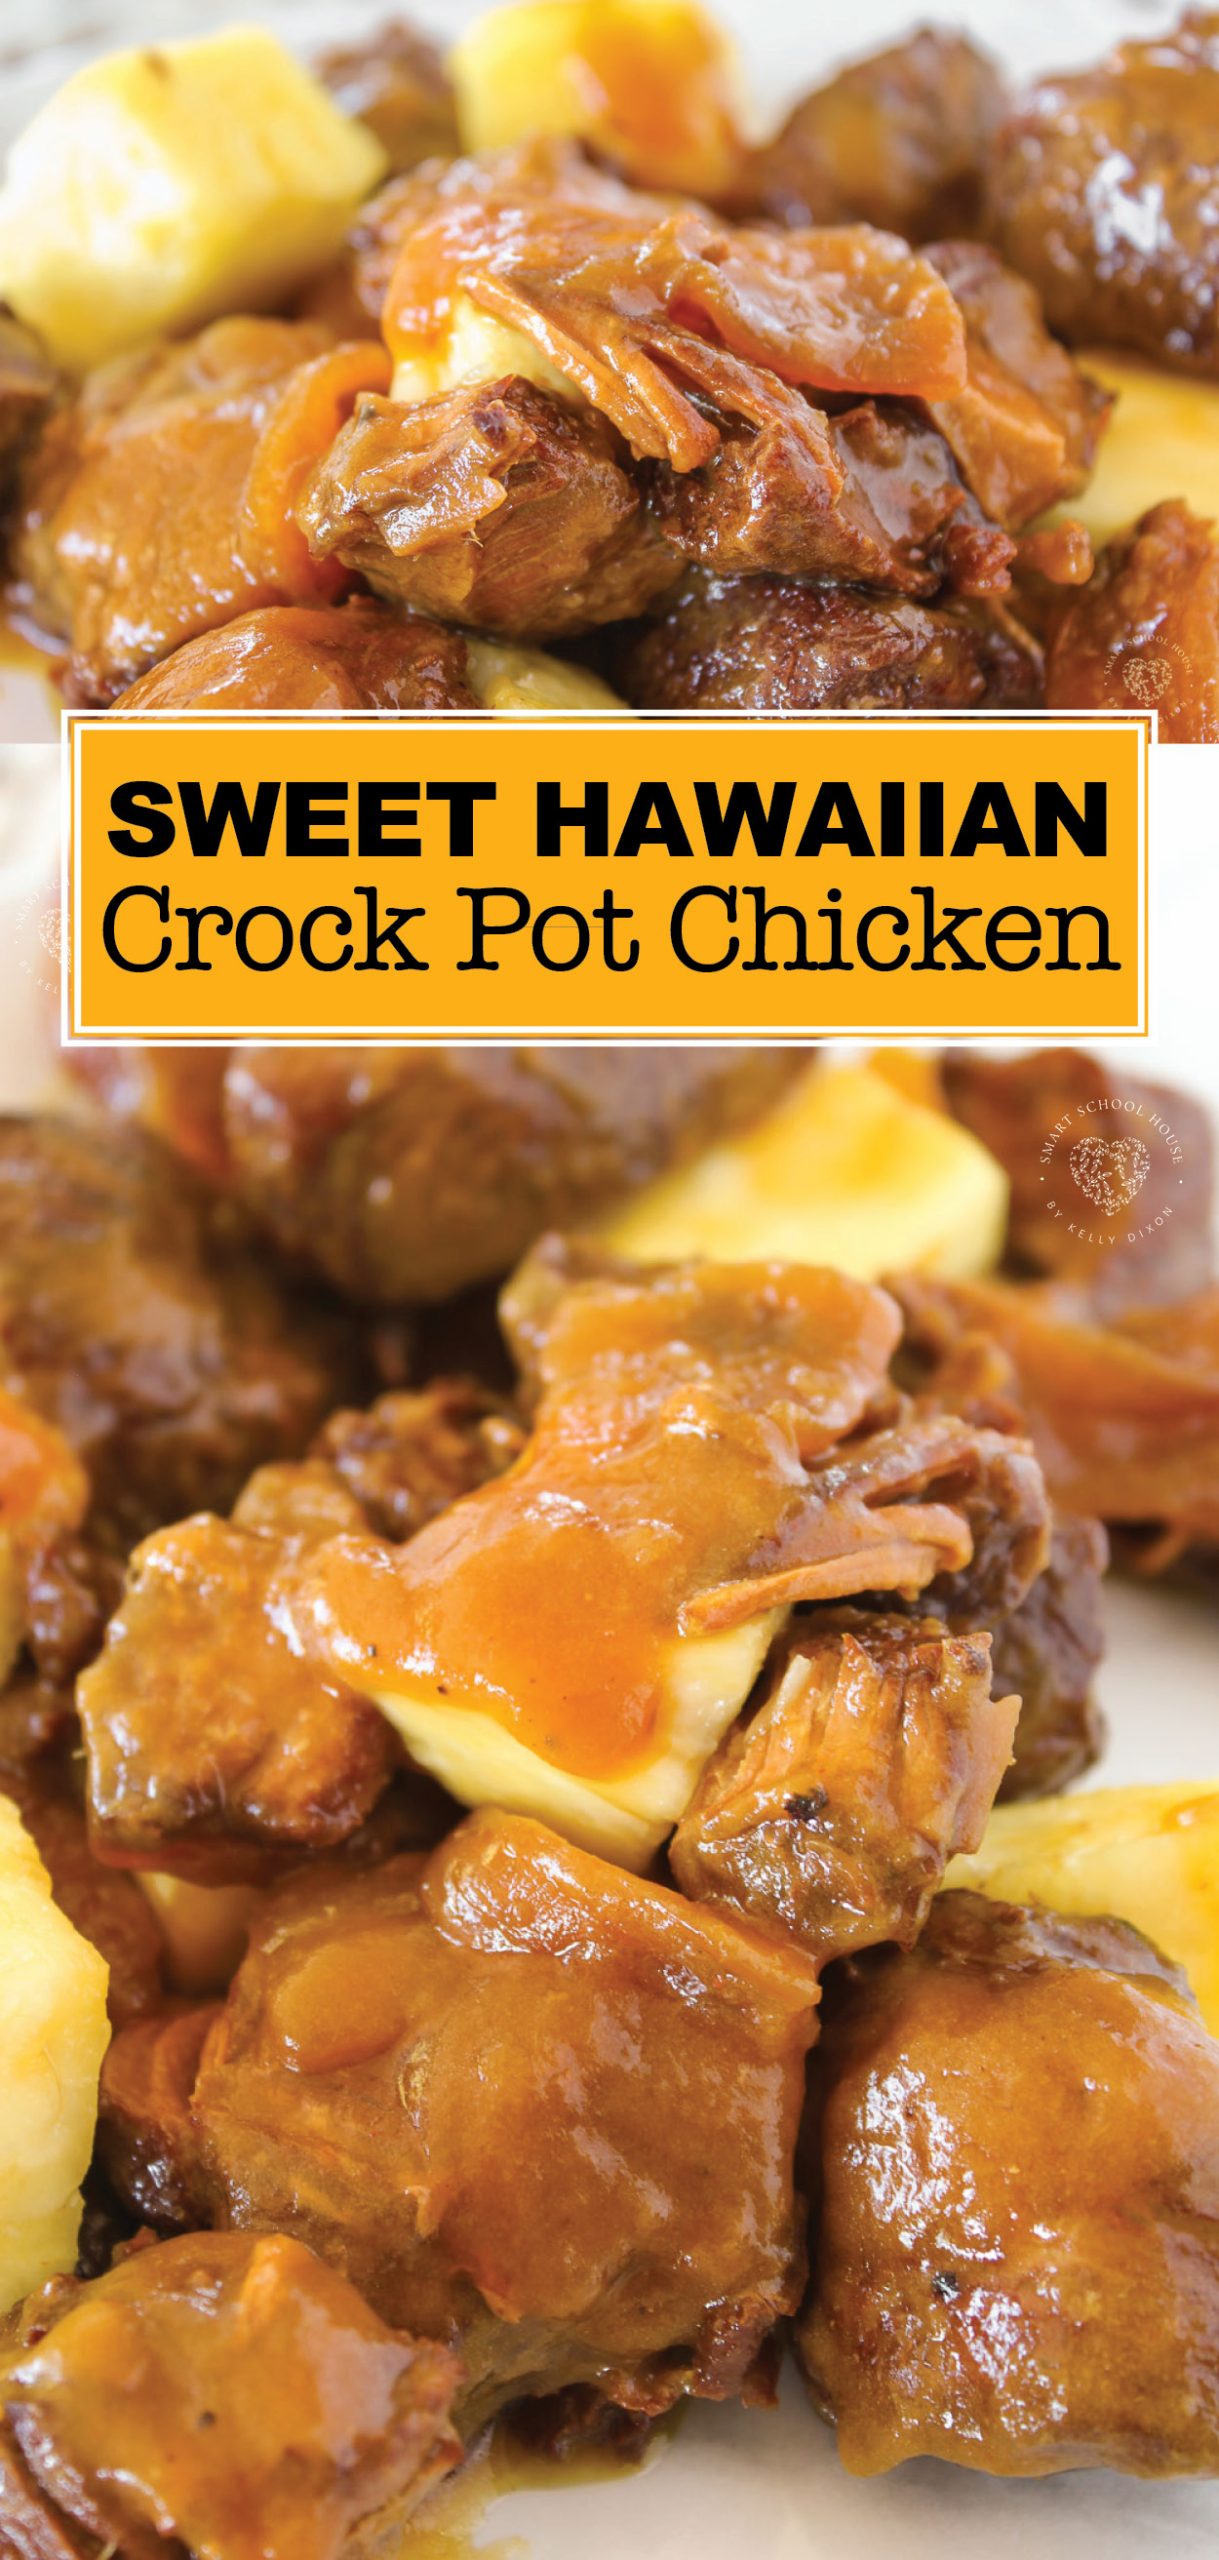 Sweet Hawaiian Crock Pot Chicken Recipe. Tender chicken smothered in a tropical glaze for a burst of pineapple flavor in every bite! Cook on low in Crock Pot 6-8 hours, that’s it! Done!